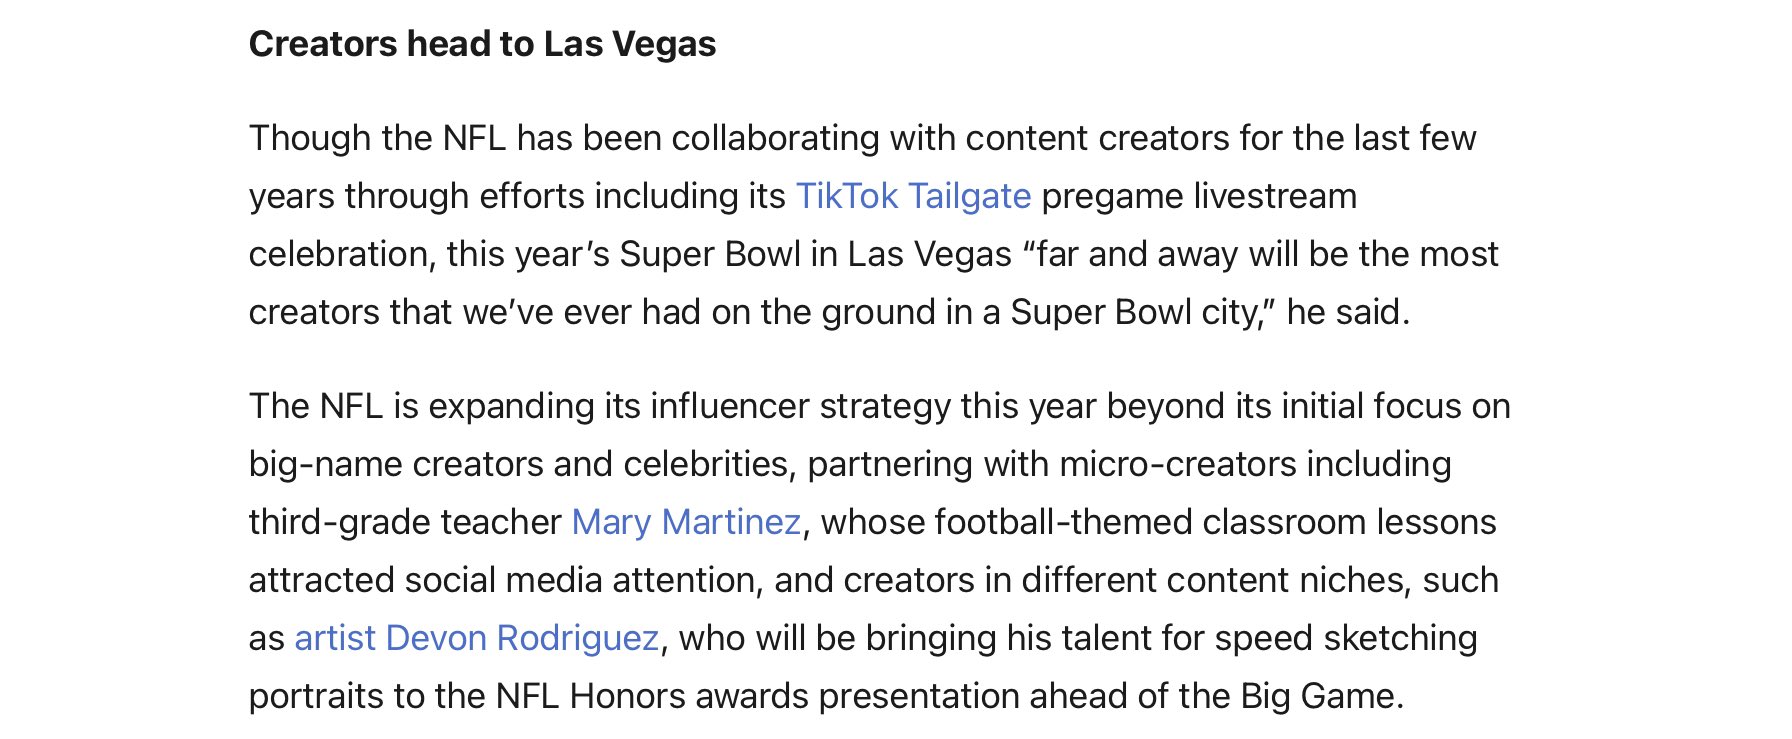 Neil Horowitz on X: The NFL has been putting out lots of pub about its  creator program and  partnership this last week, here's some more  good stuff on how they're upping